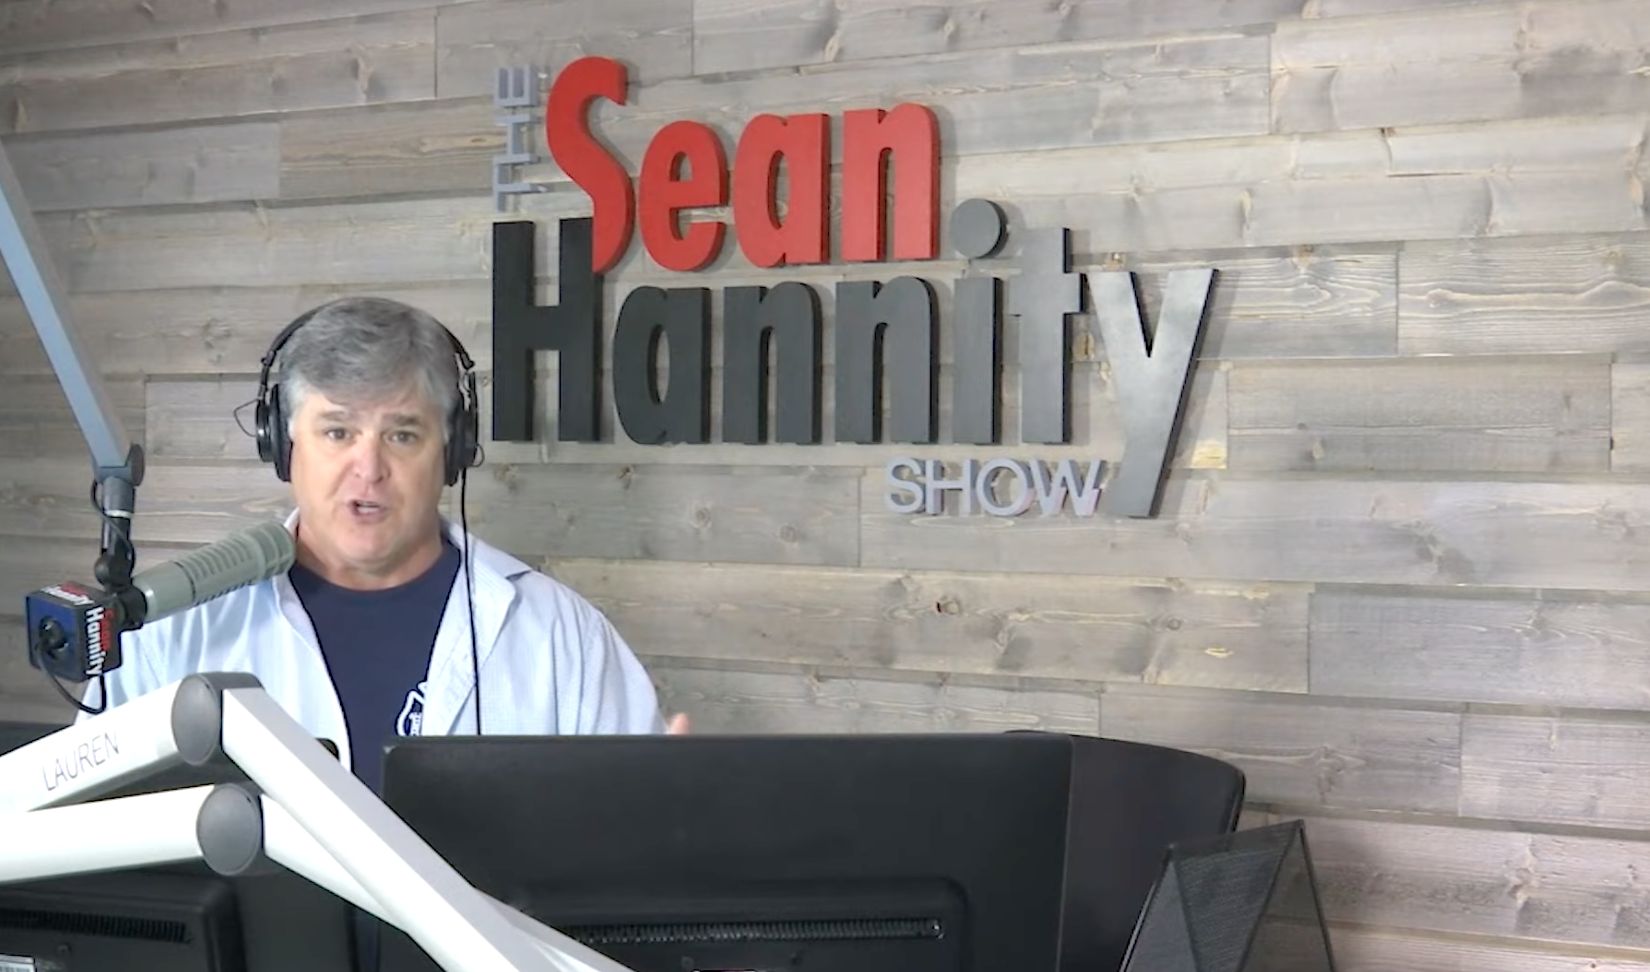 Listen: O'Reilly & Hannity on Kyle Rittenhouse, Media Coverage